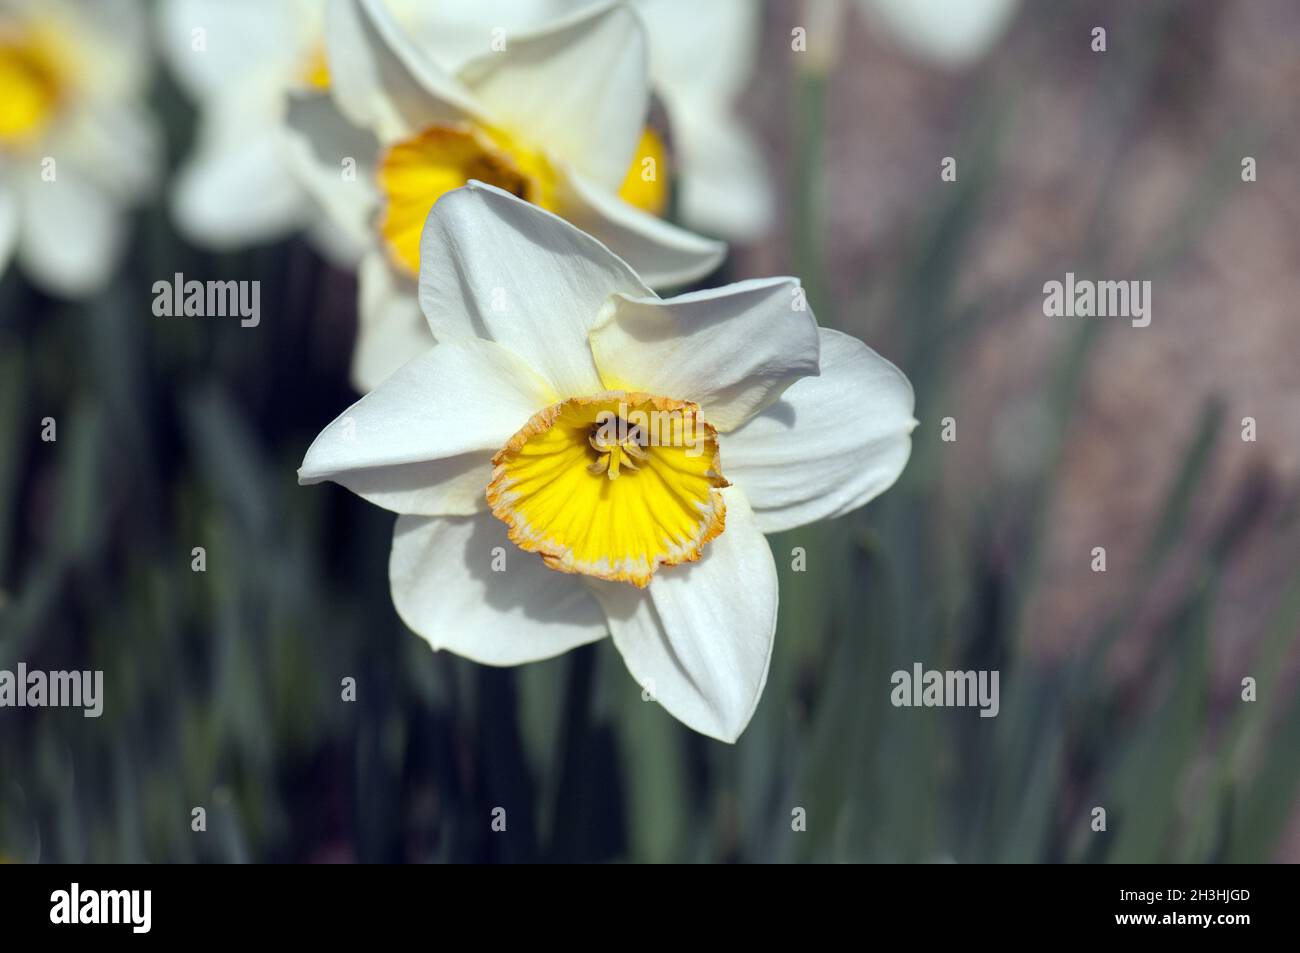 Incomparable; Narcissus; Narcissus x incomparabilis; Stock Photo